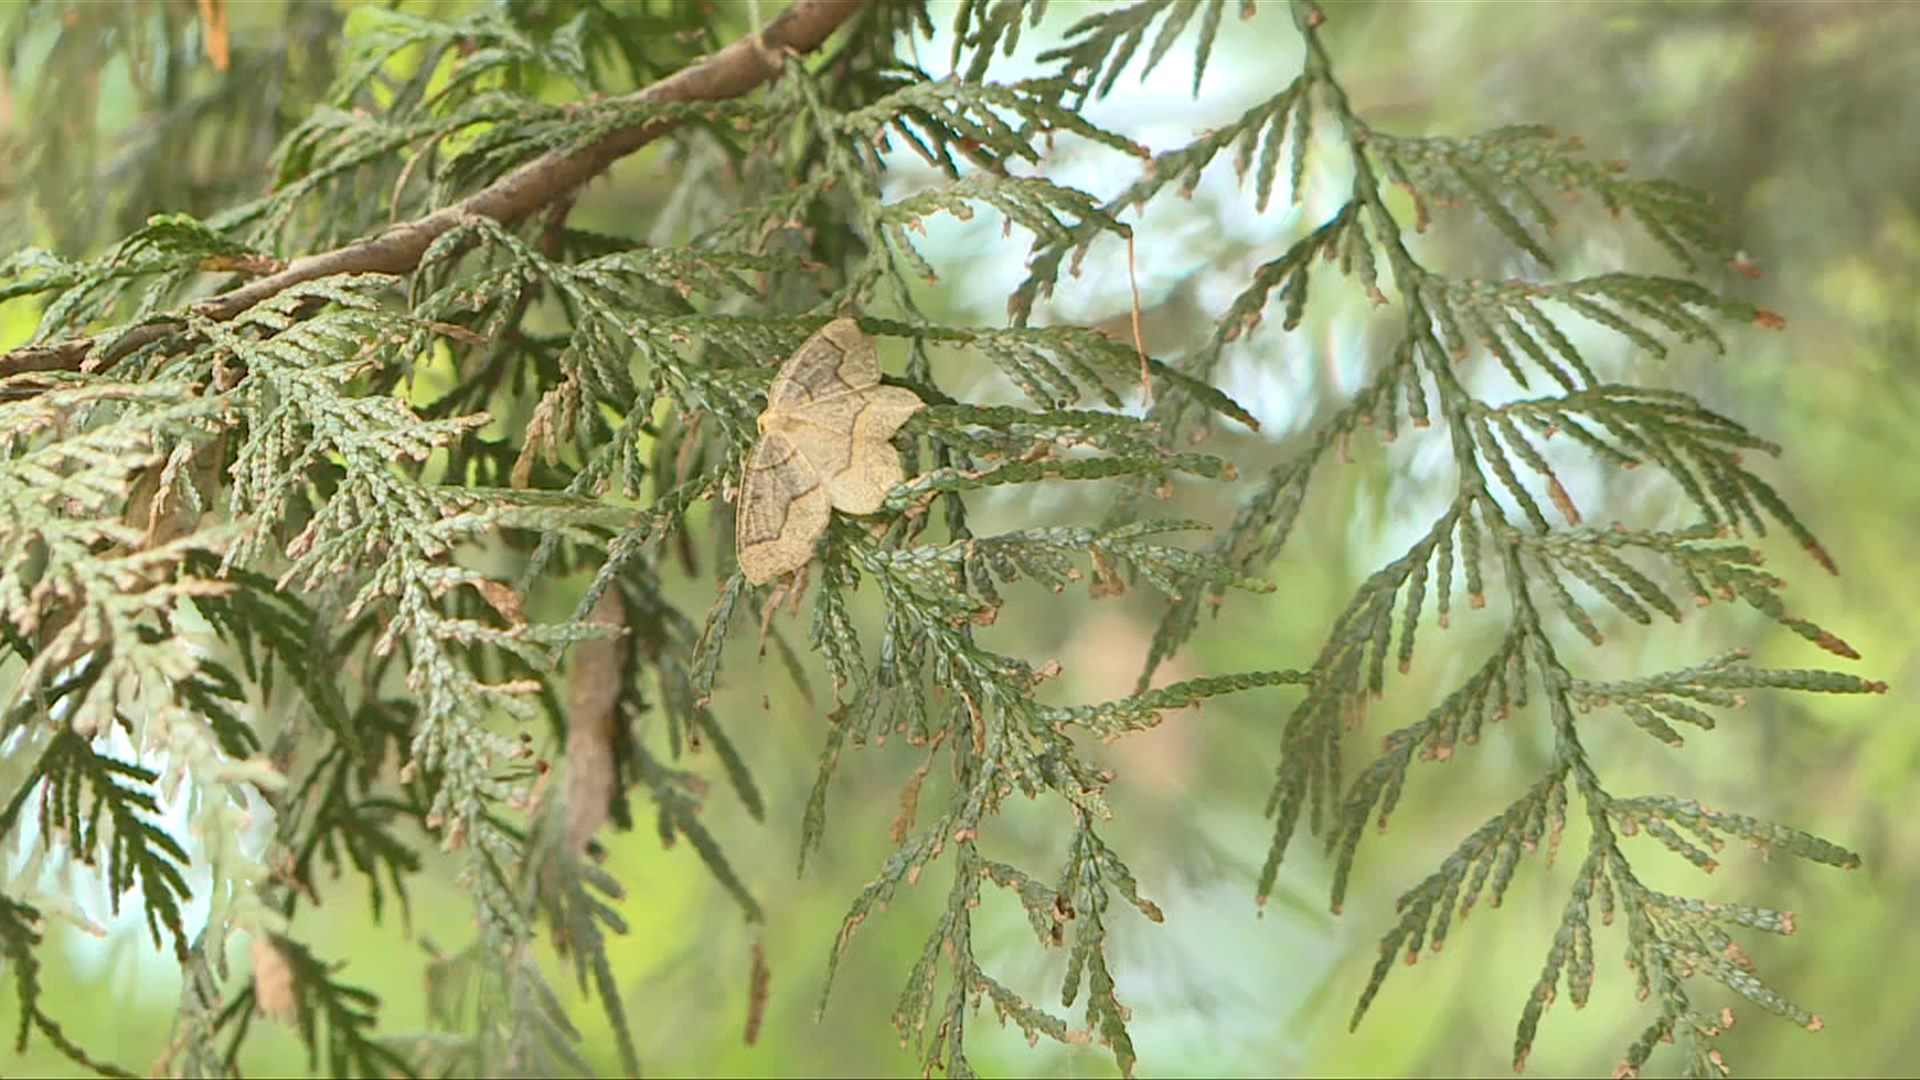 A looper moth is seen on the branches of a hemlock tree